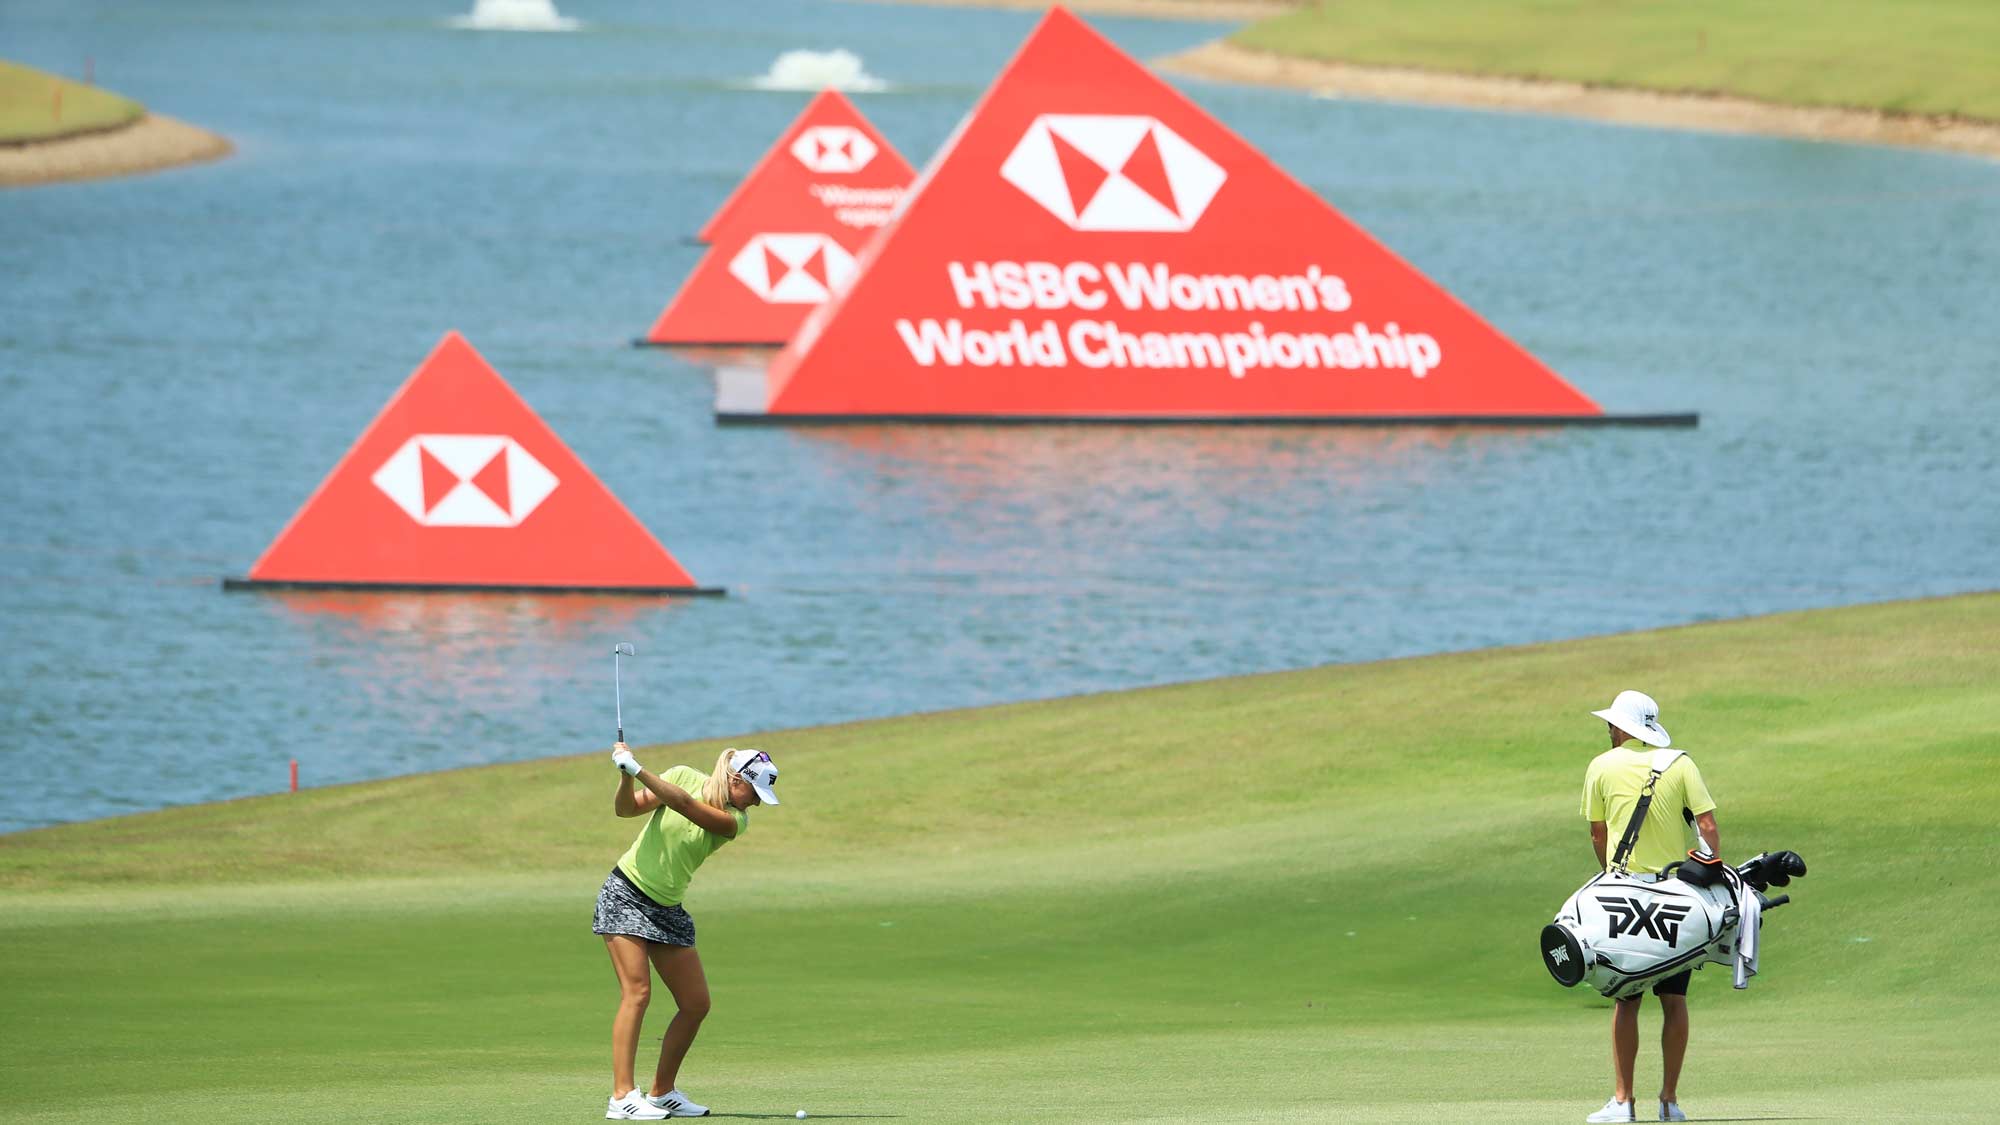 Anna Nordqvist of Sweden plays a shot on the fifth hole during a practice round prior to the HSBC Women's World Championship at Sentosa Golf Club on February 26, 2019 in Singapore.